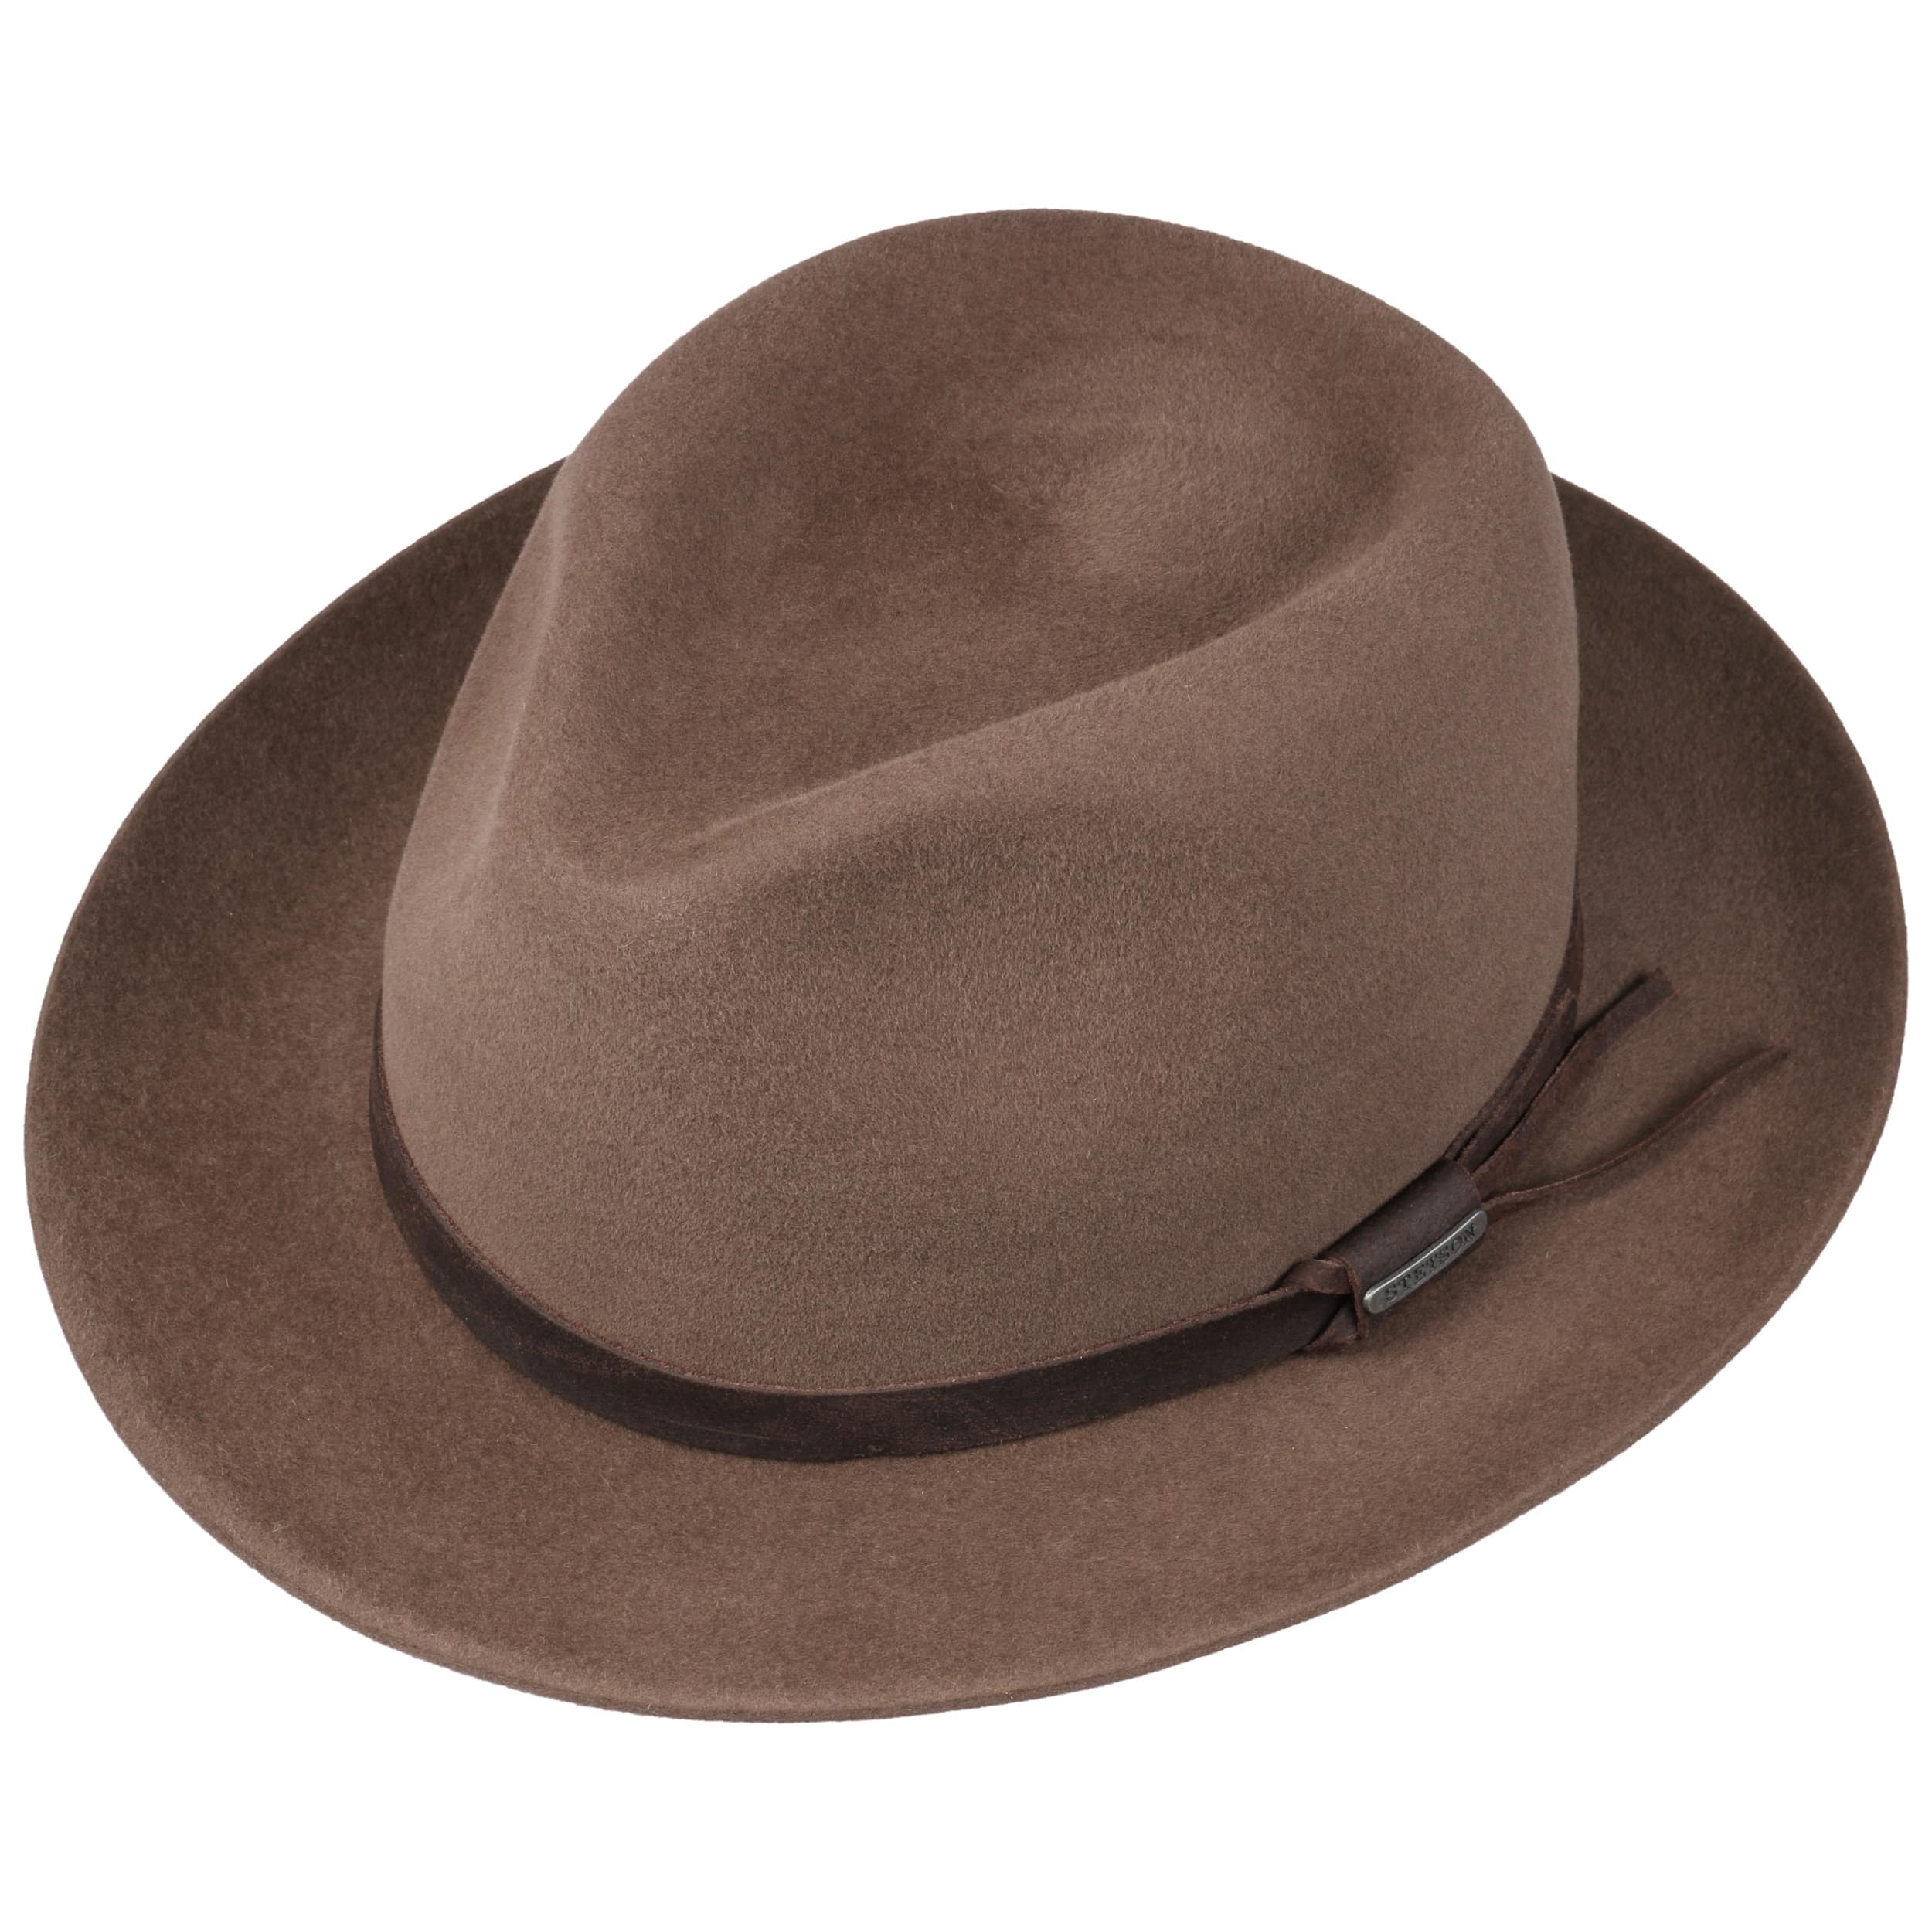 Wide Brim Fedora Hat Western Wool Cowboy Felt Hats Men Women Crushable Outback Trilby Caps Outdoor Christmas Gift 